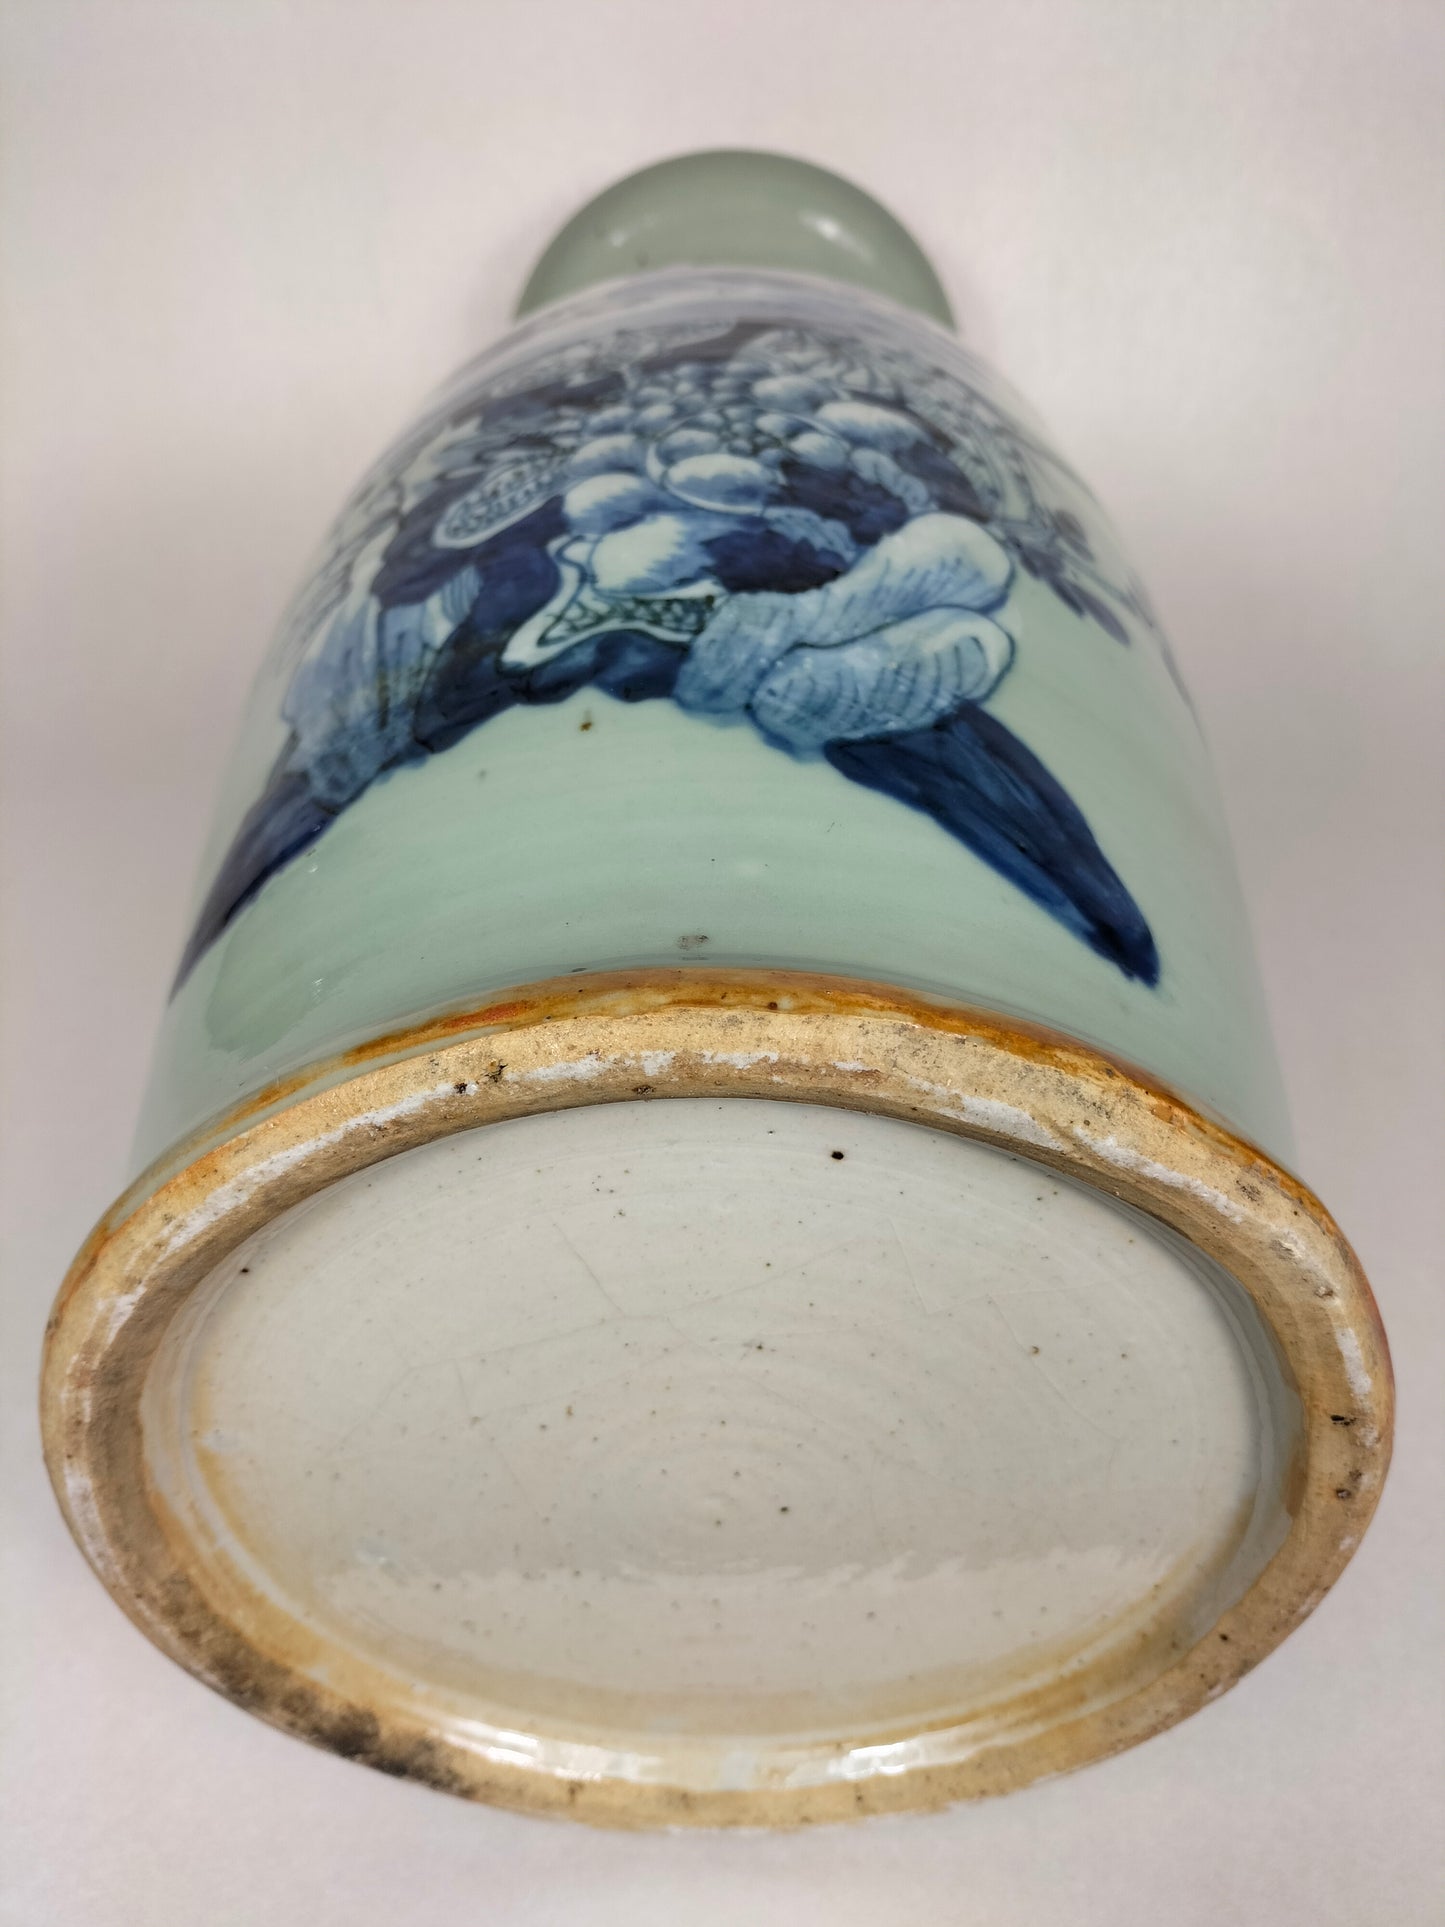 Large antique Chinese celadon vase decorated with birds and flowers // Qing Dynasty - 19th century